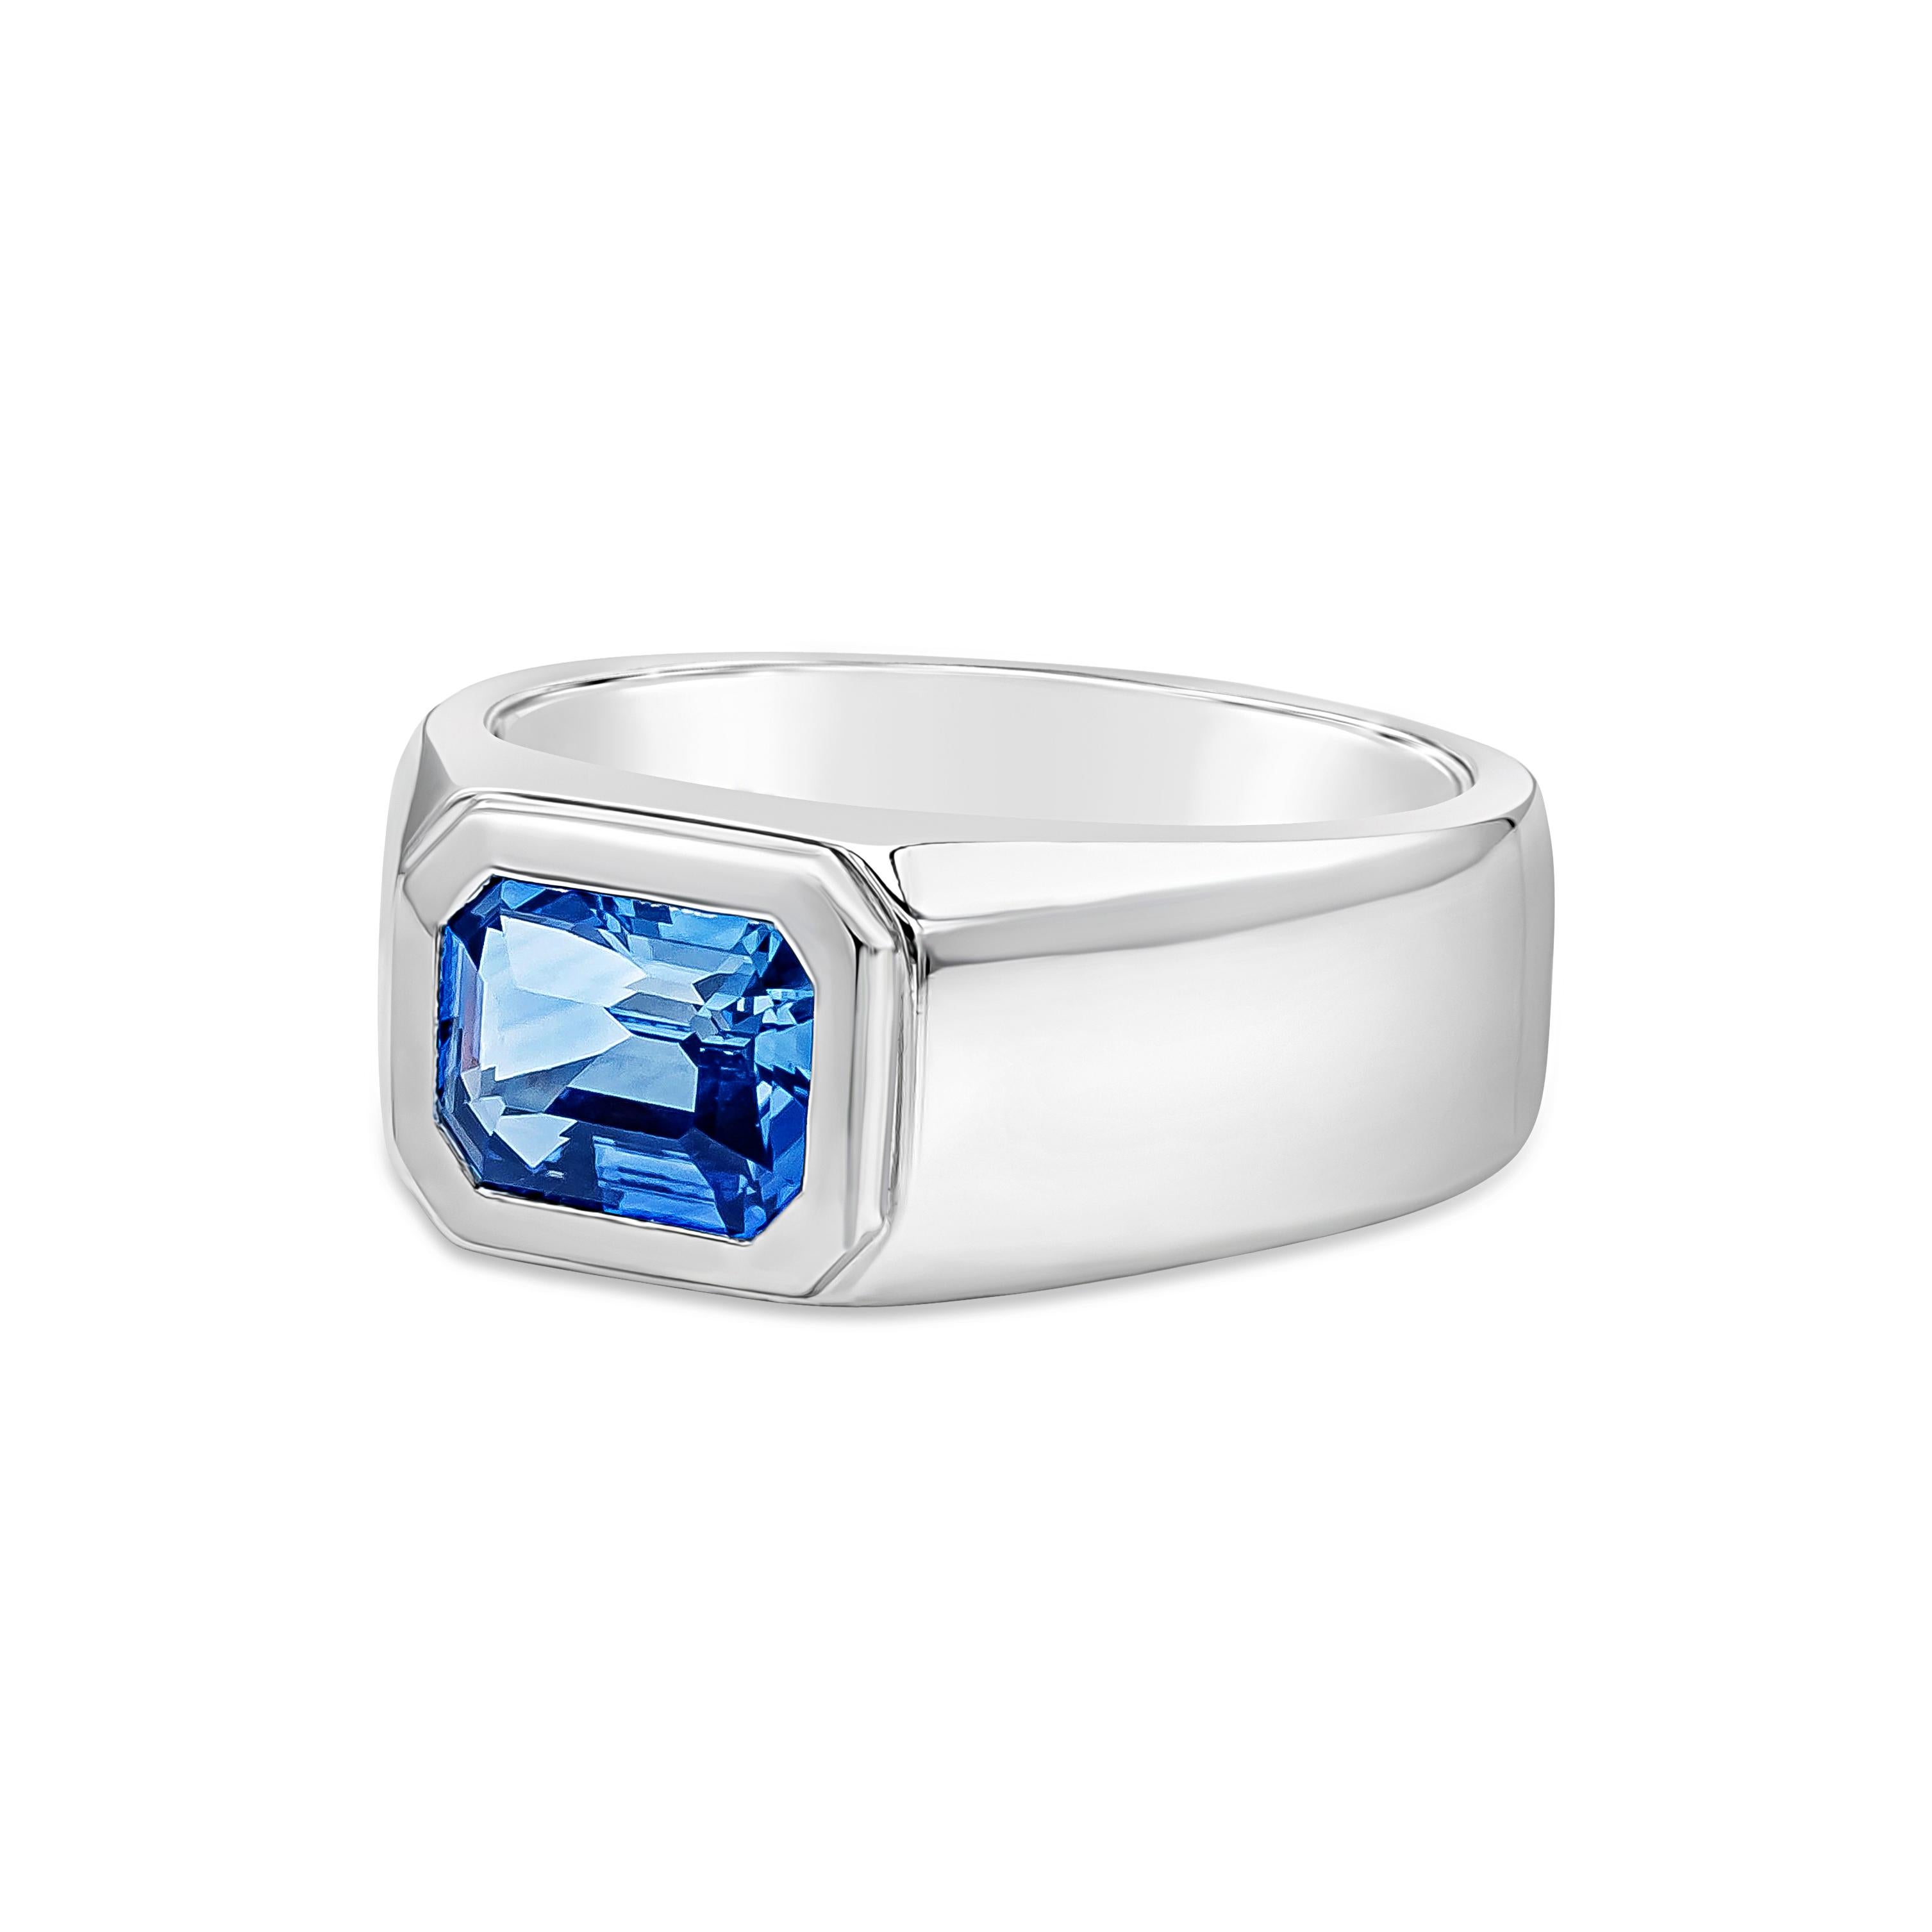 An elegant men's wedding band ring featuring an astonishing GIA Certified 2.98 carat emerald cut blue sapphire, set in a beautiful wide platinum band. Size 10

Roman Malakov is a custom house, specializing in creating anything you can imagine. If